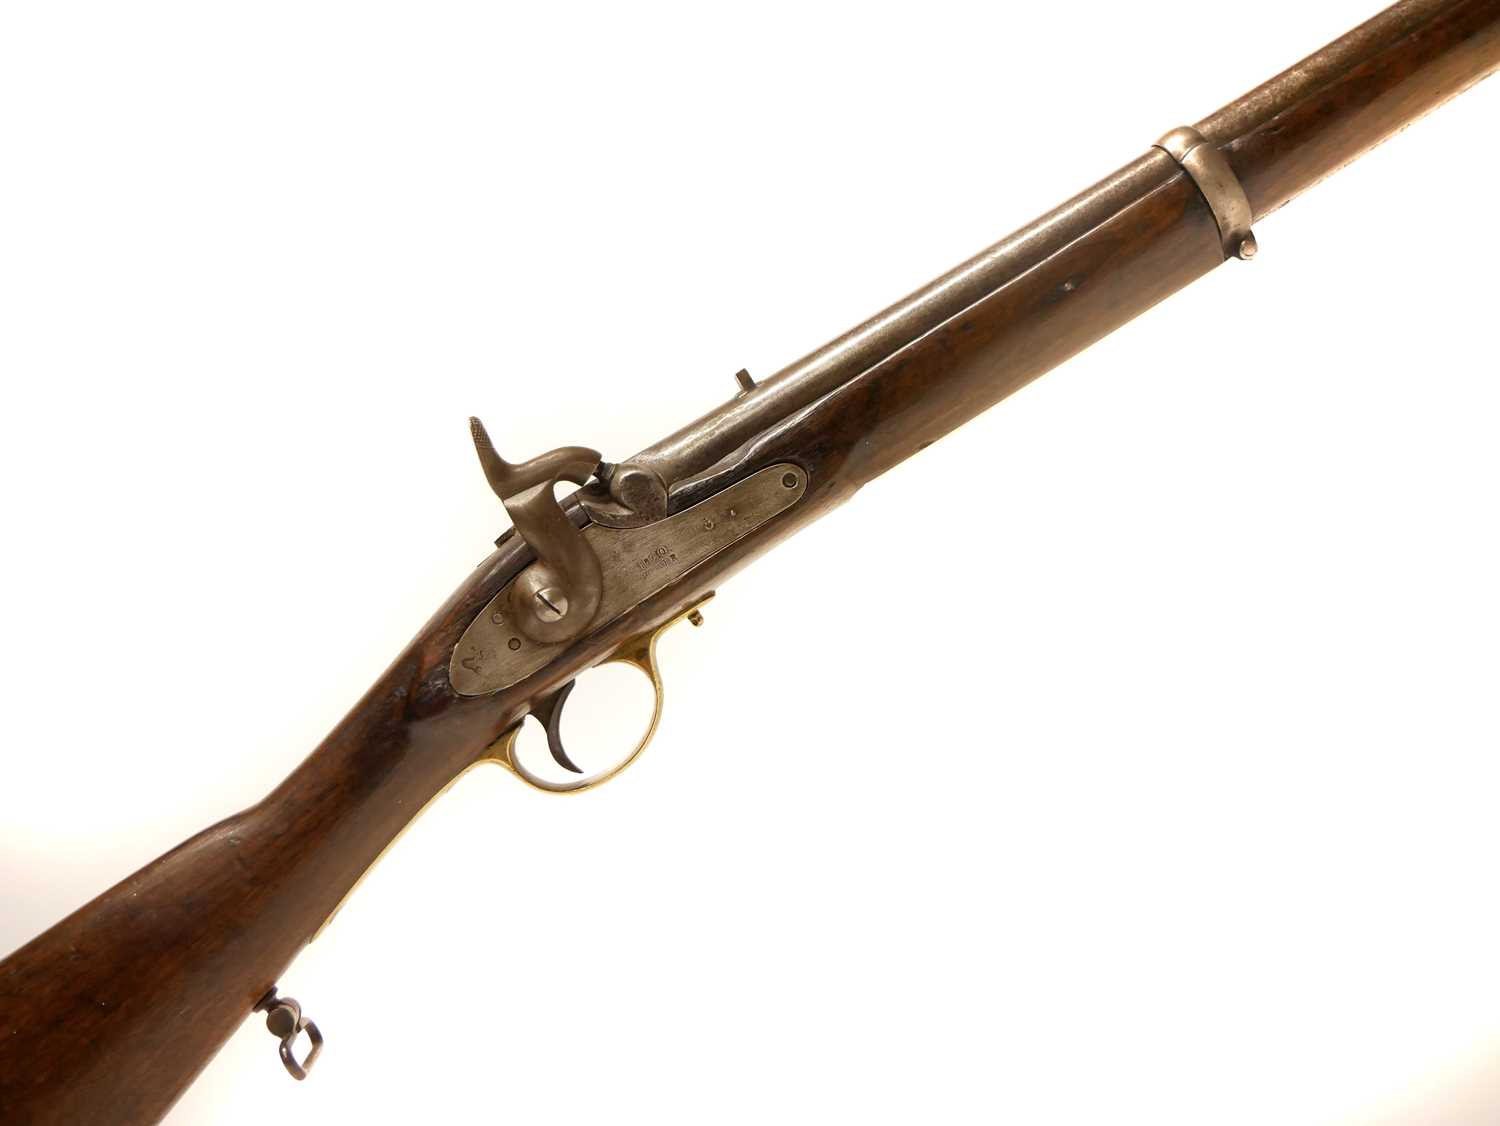 Lot 23 - Tower Percussion Sepoy musket